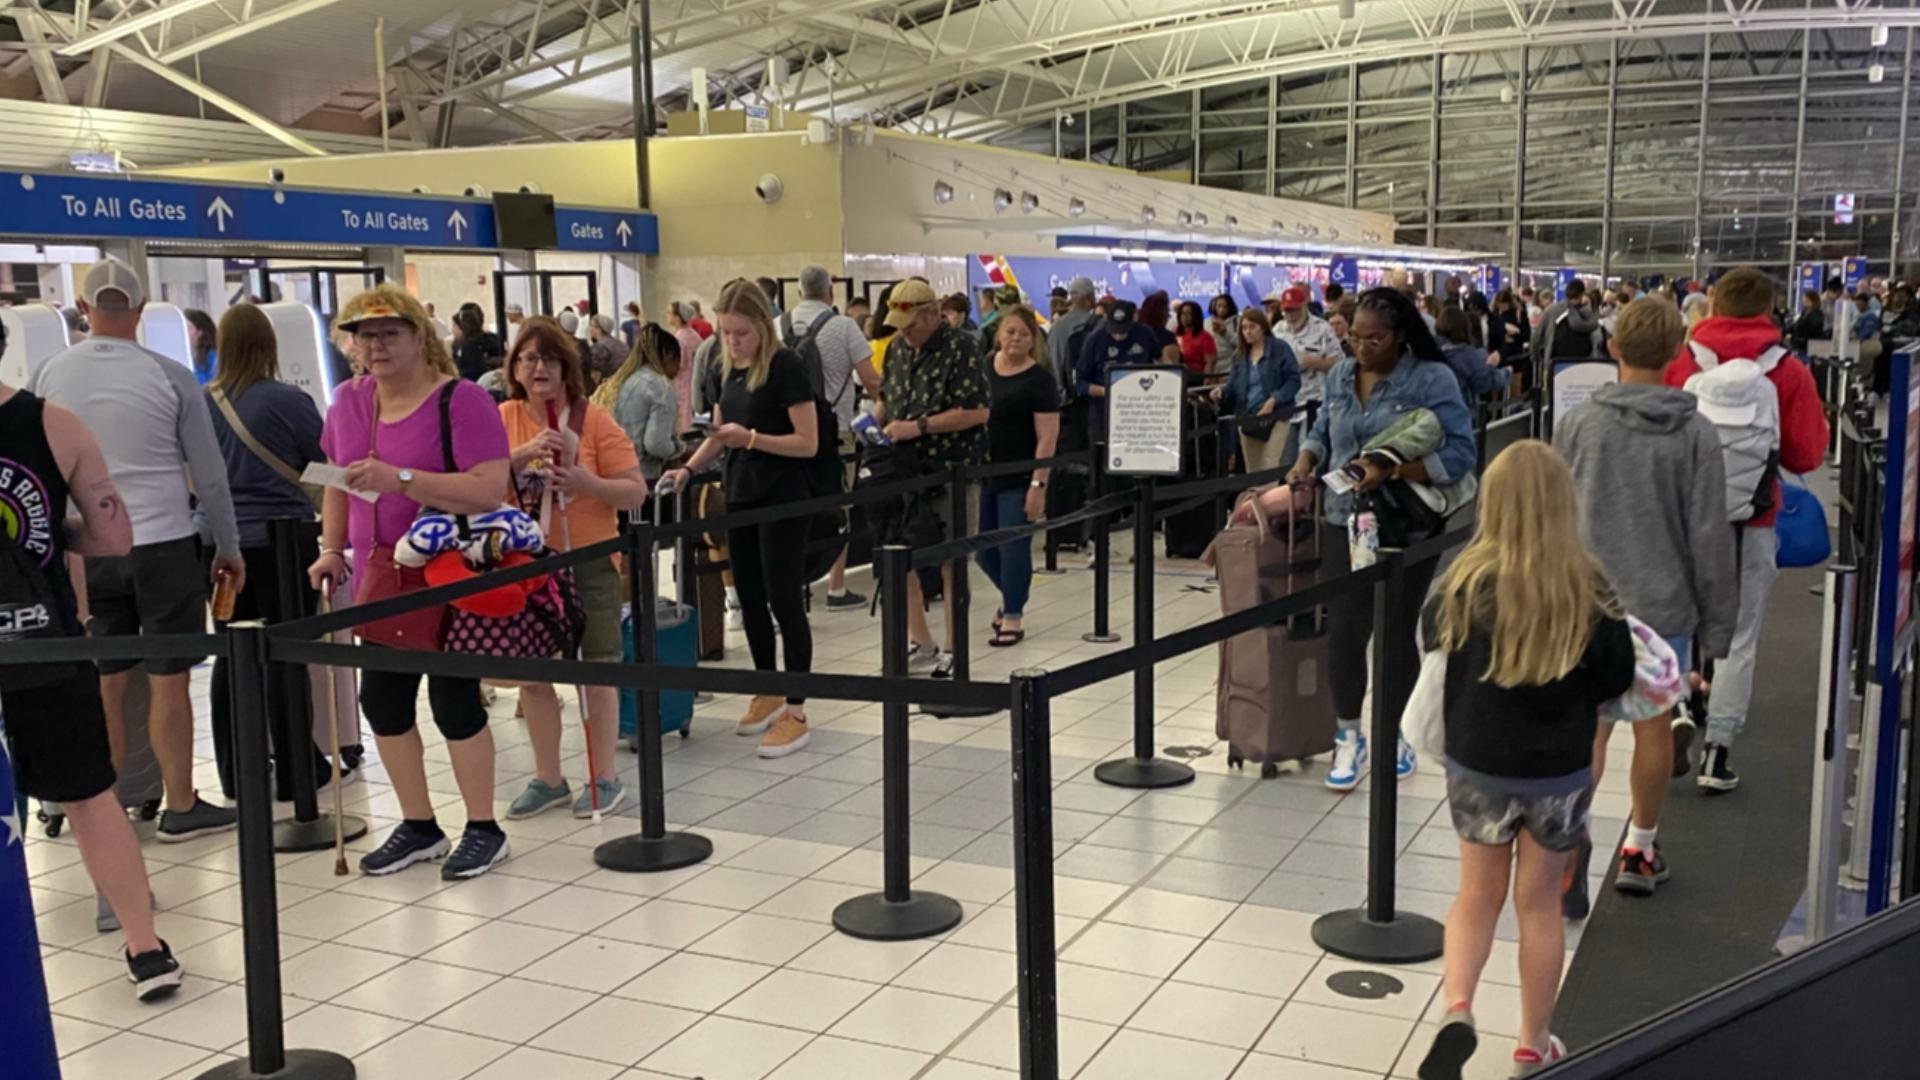 Even as Americans worry about the economy, data suggests they're kicking off the summer by traveling. Highways and airports are likely to be jammed.